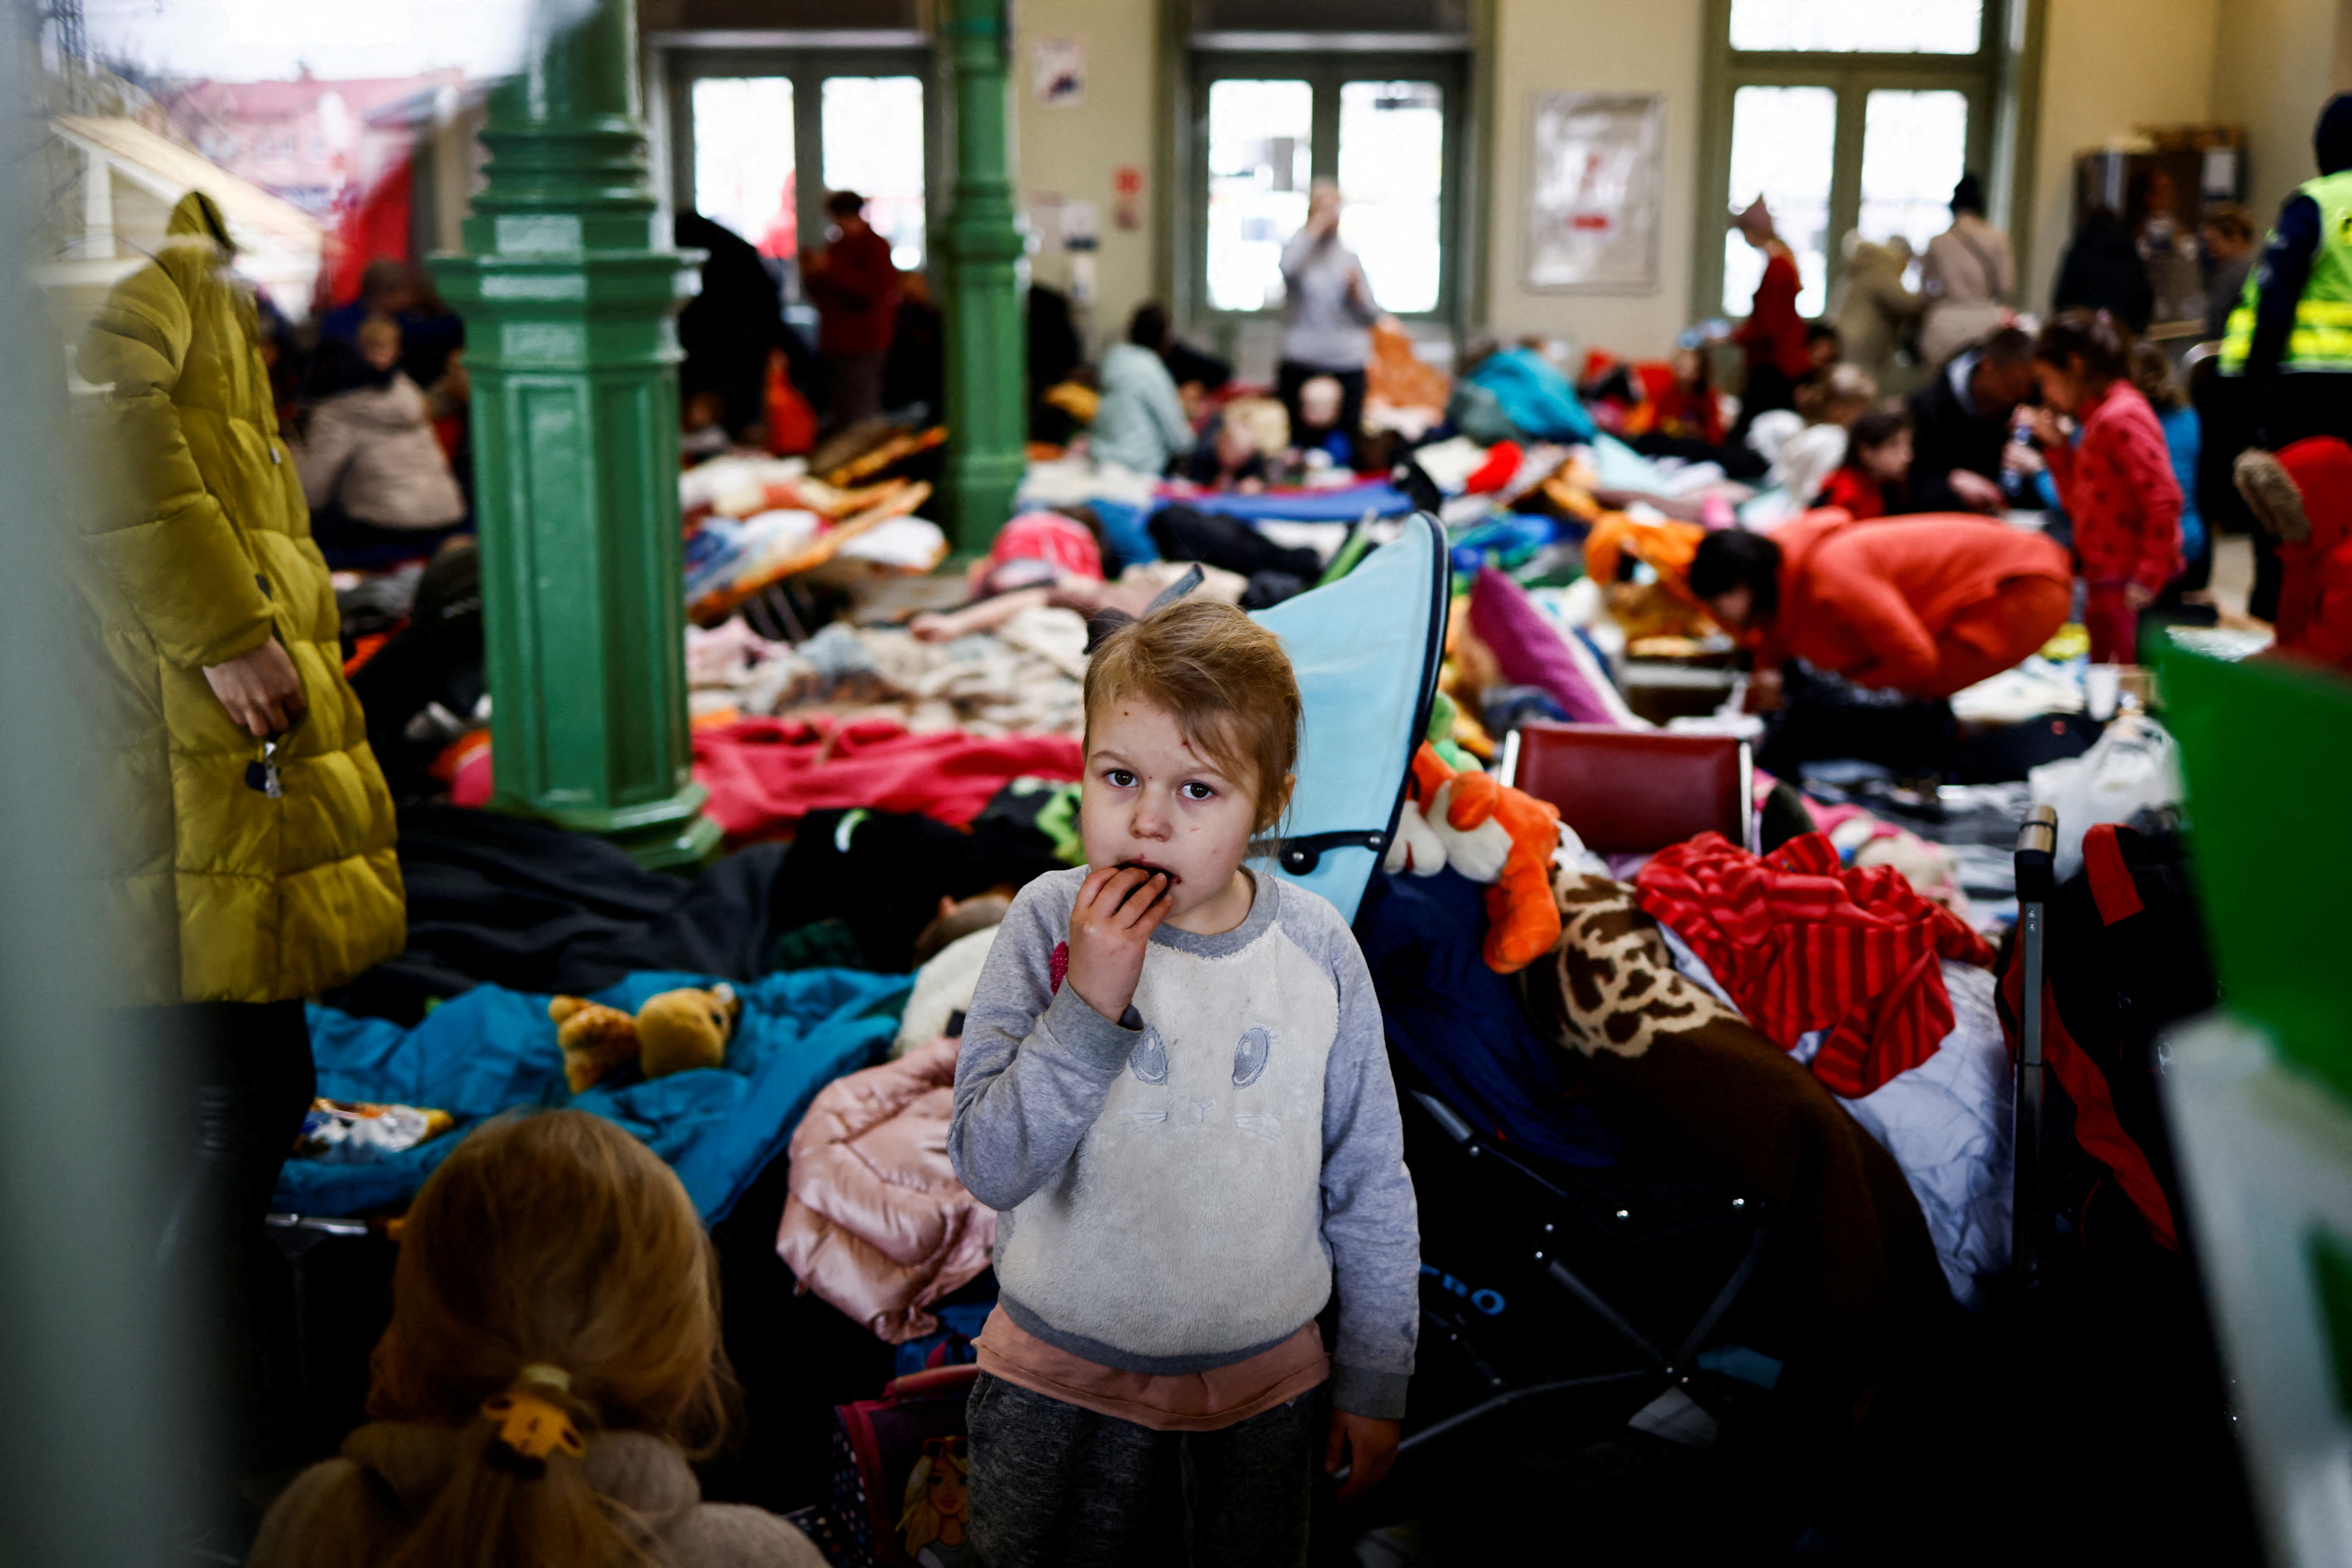 A child eats a cookie as she stands in a temporary accommodation for refugees at the train station, after fleeing Russian invasion of Ukraine, in Przemysl